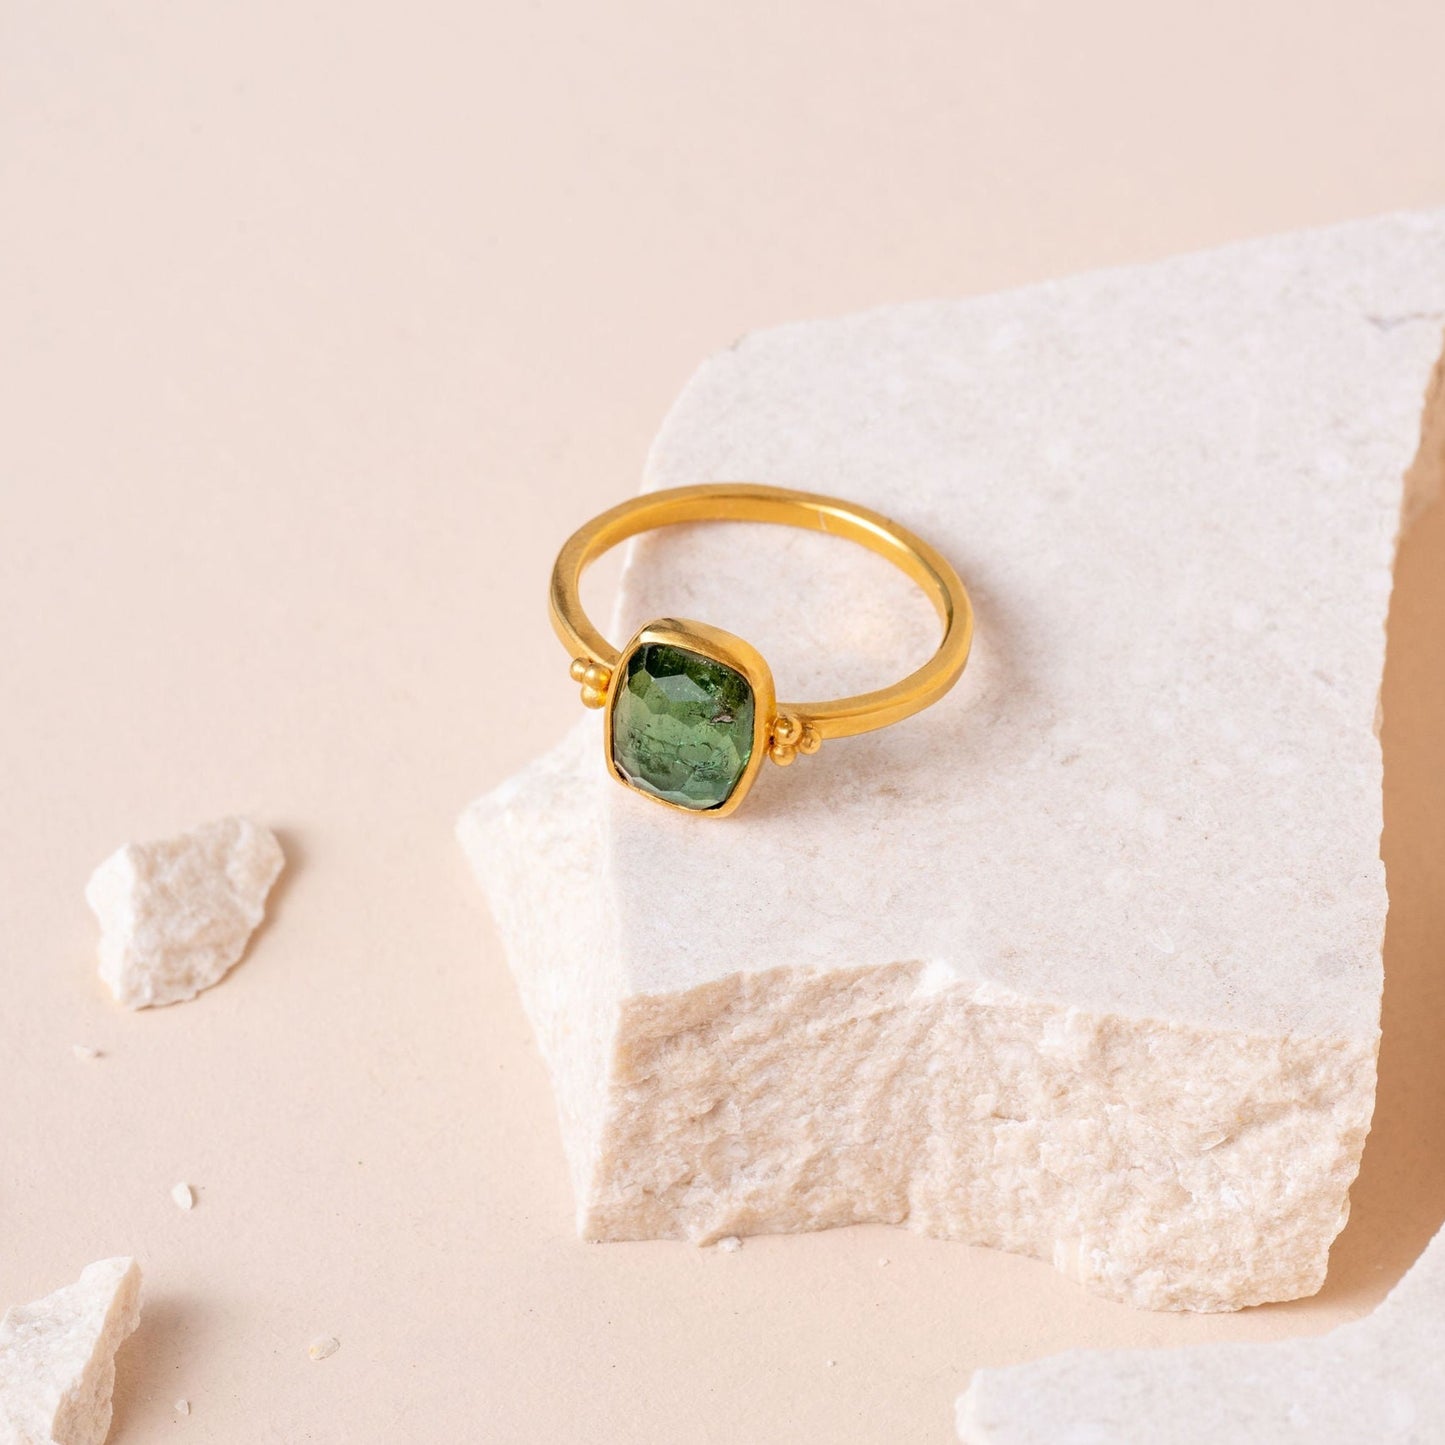 A detailed photograph of a singular gold ring, highlighting the craftsmanship of granulation and the rich hue of a green tourmaline gemstone